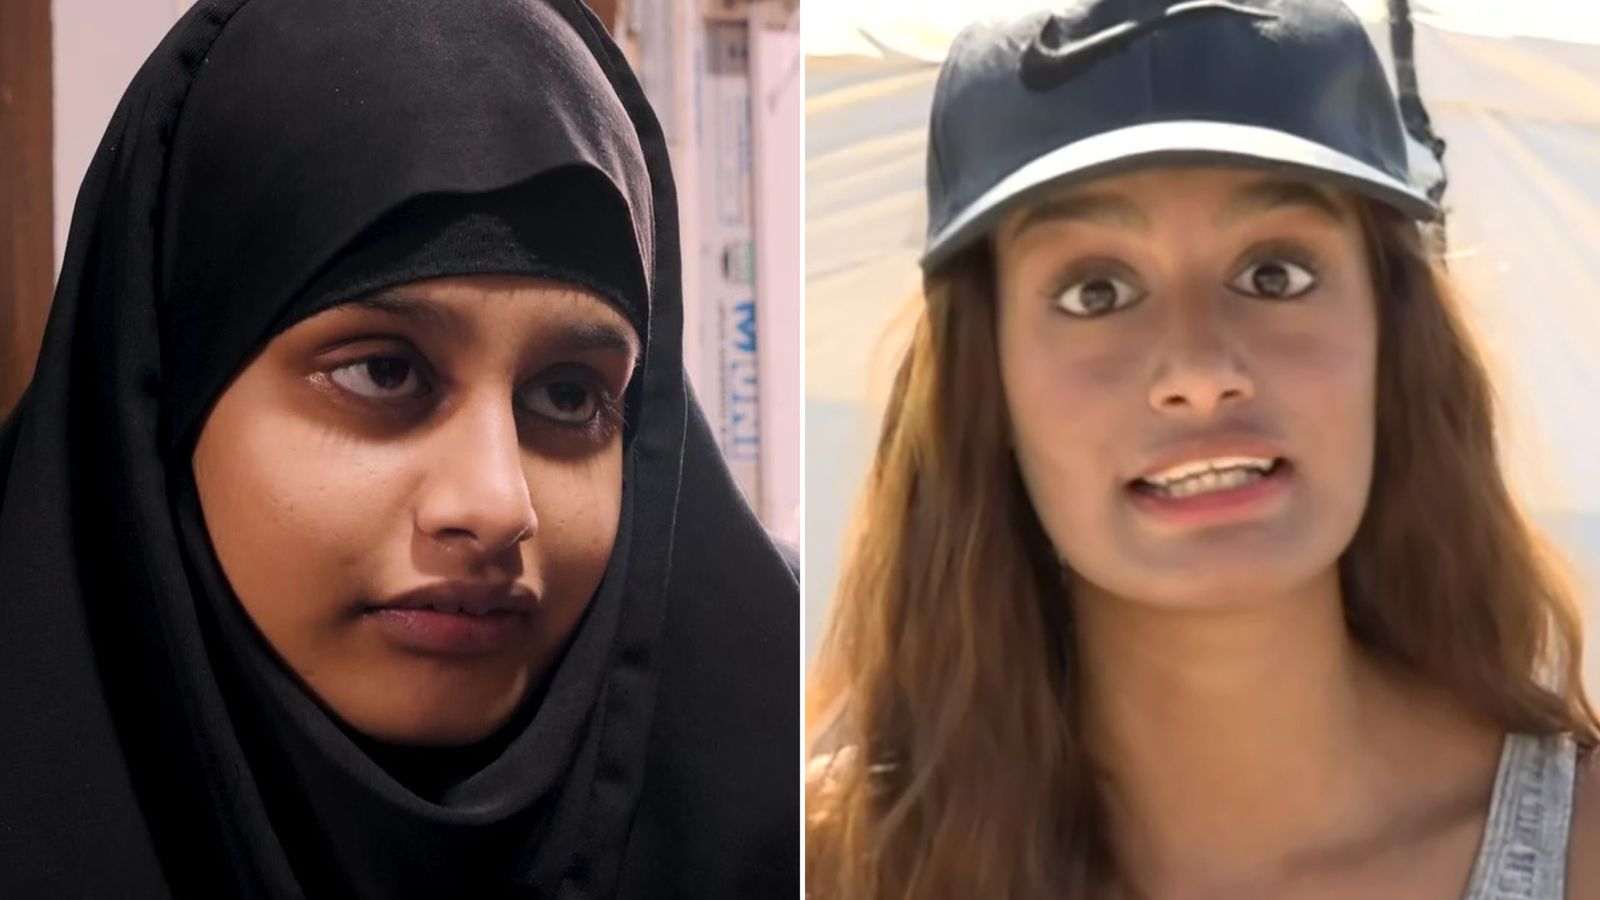 Eight years after joining IS in Syria, Shamima Begum is about to find out if she is allowed back in the UK